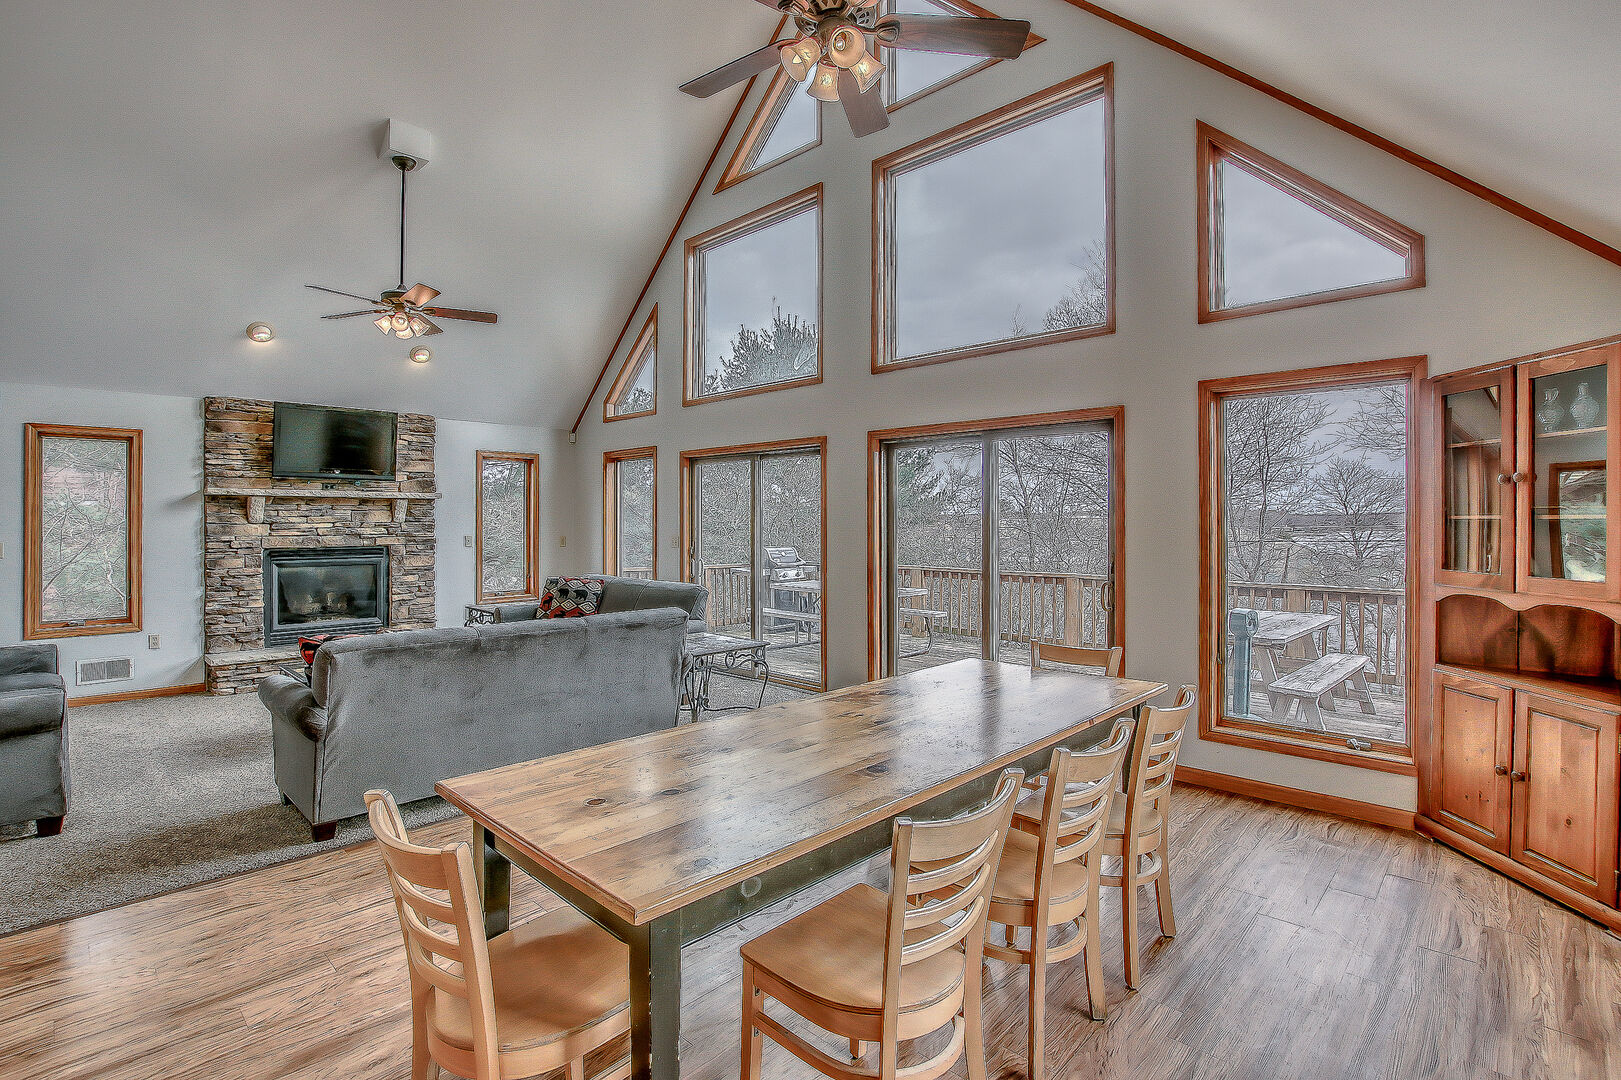 An Image of the Dining Room in Our Poconos Lake Rental.